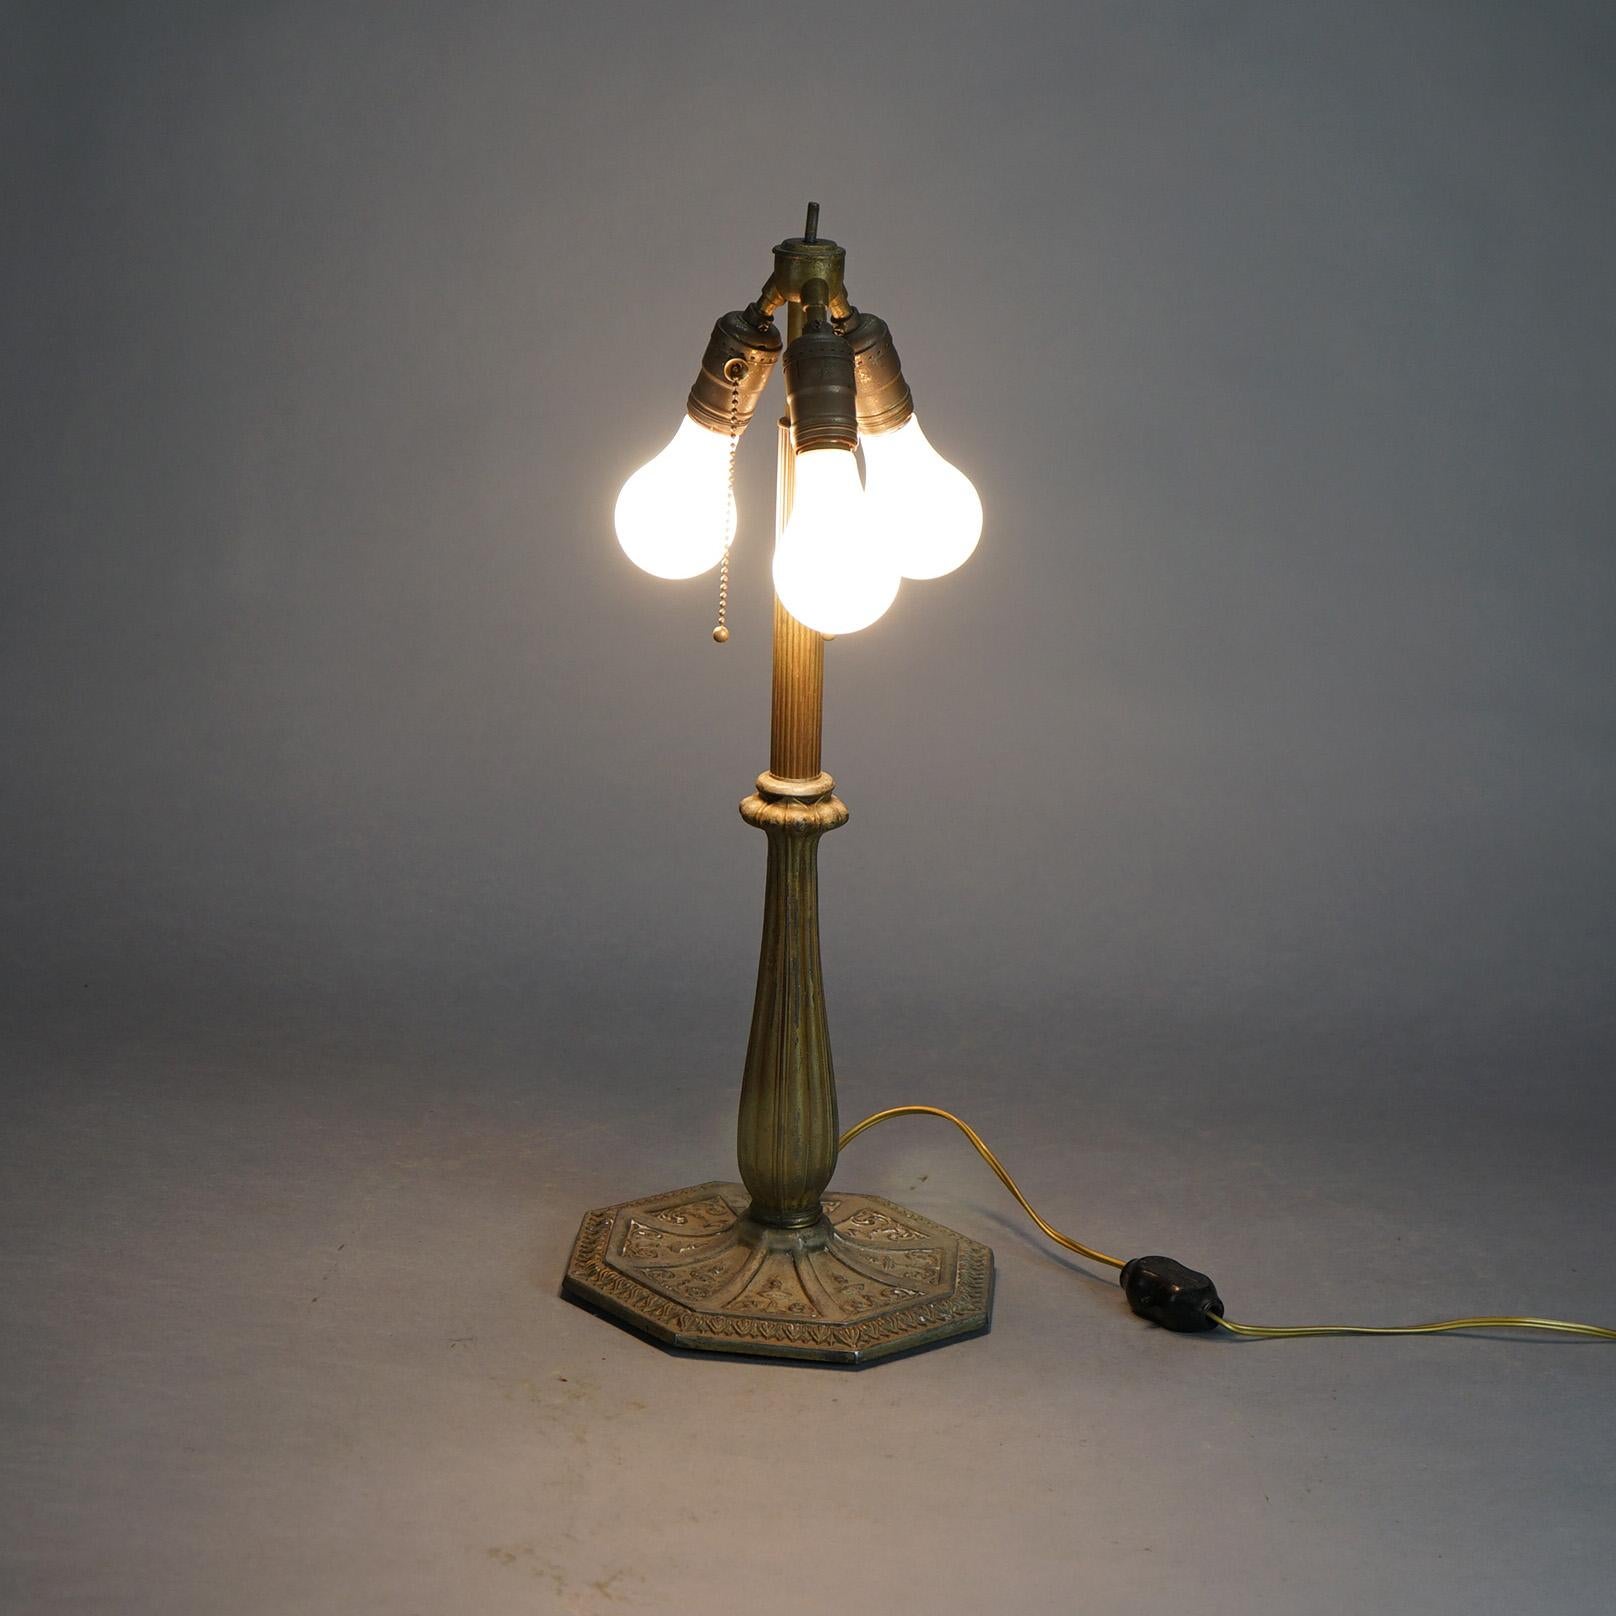 Antique Arts & Crafts Neoclassical Bradley & Hubbard Slag Glass Table Lamp C1920 For Sale 8